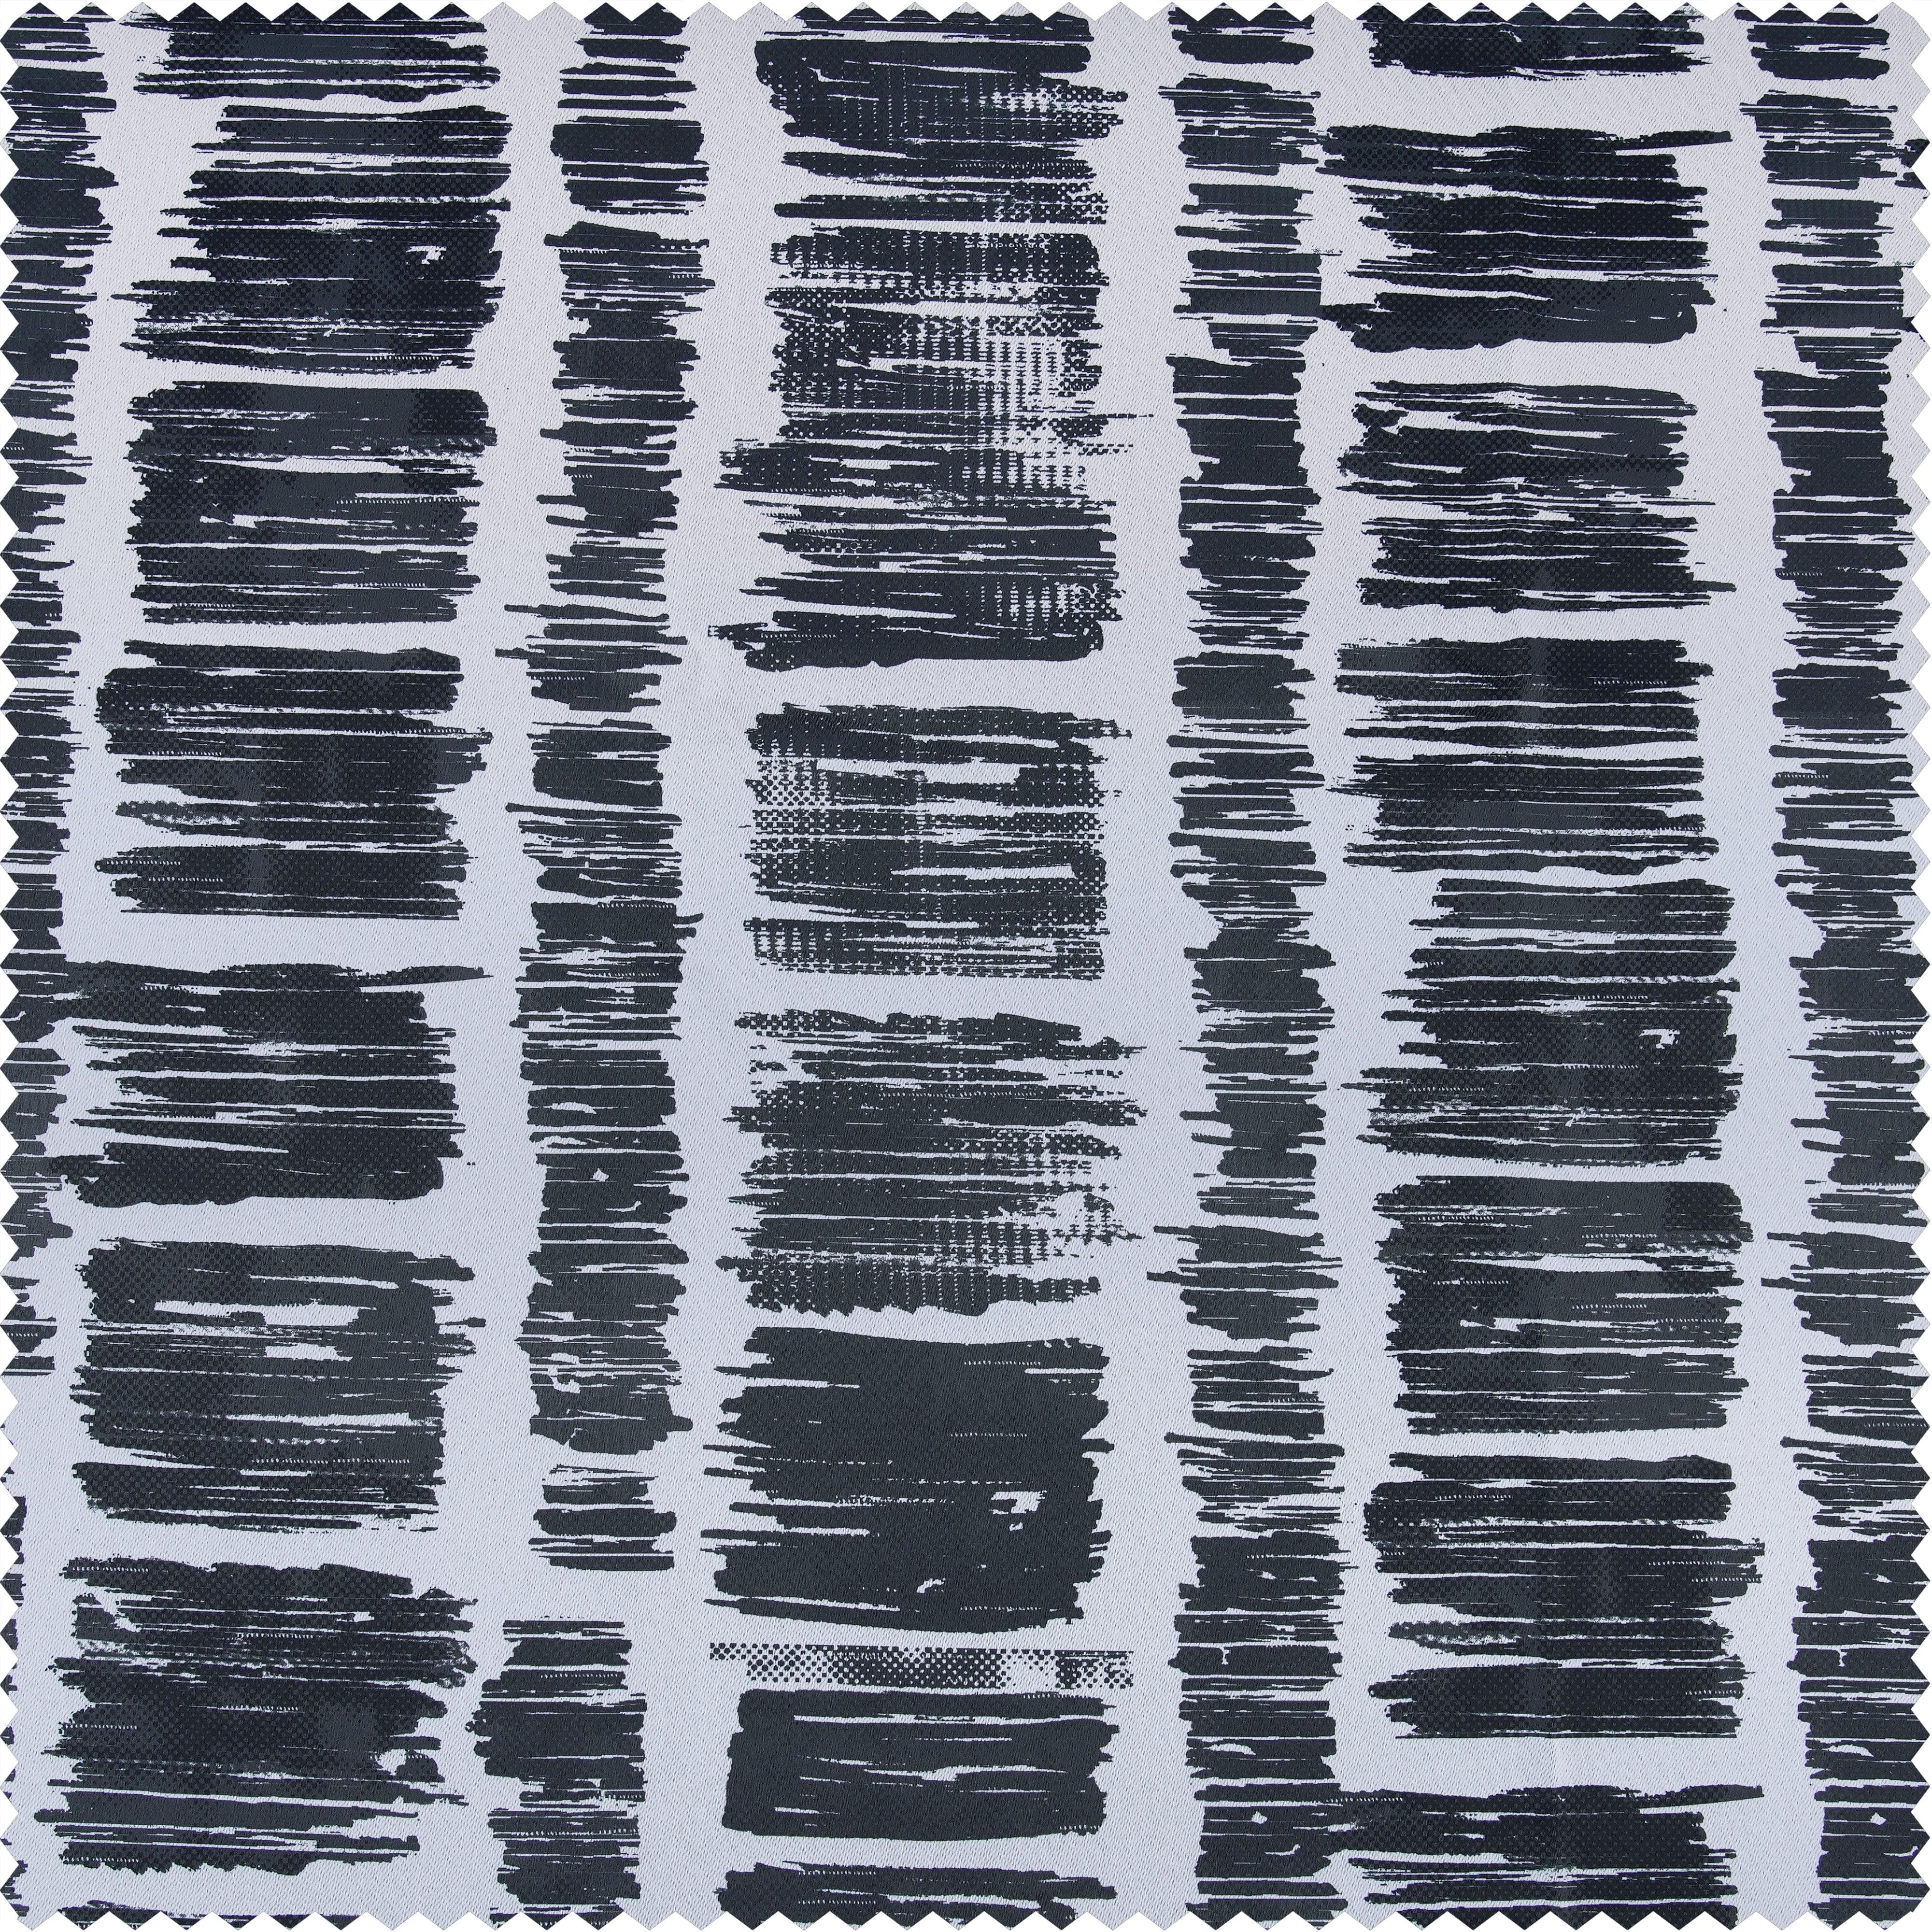 Matchstick Charcoal Black Abstract Room Darkening Curtain